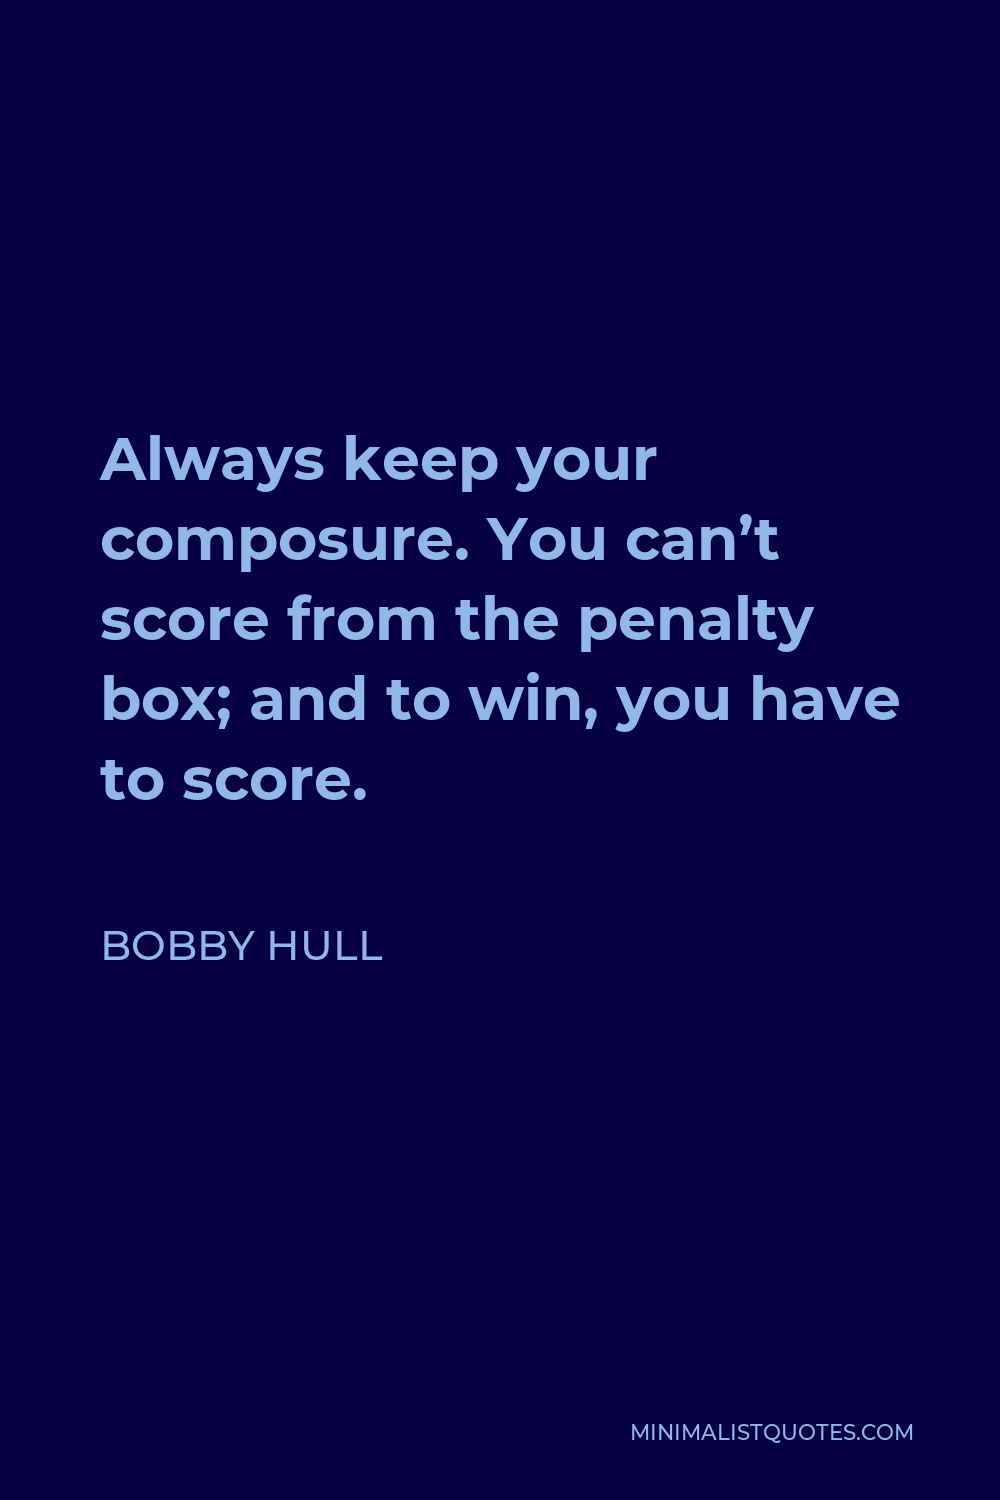 Bobby Hull Quote - Always keep your composure. You can’t score from the penalty box; and to win, you have to score.